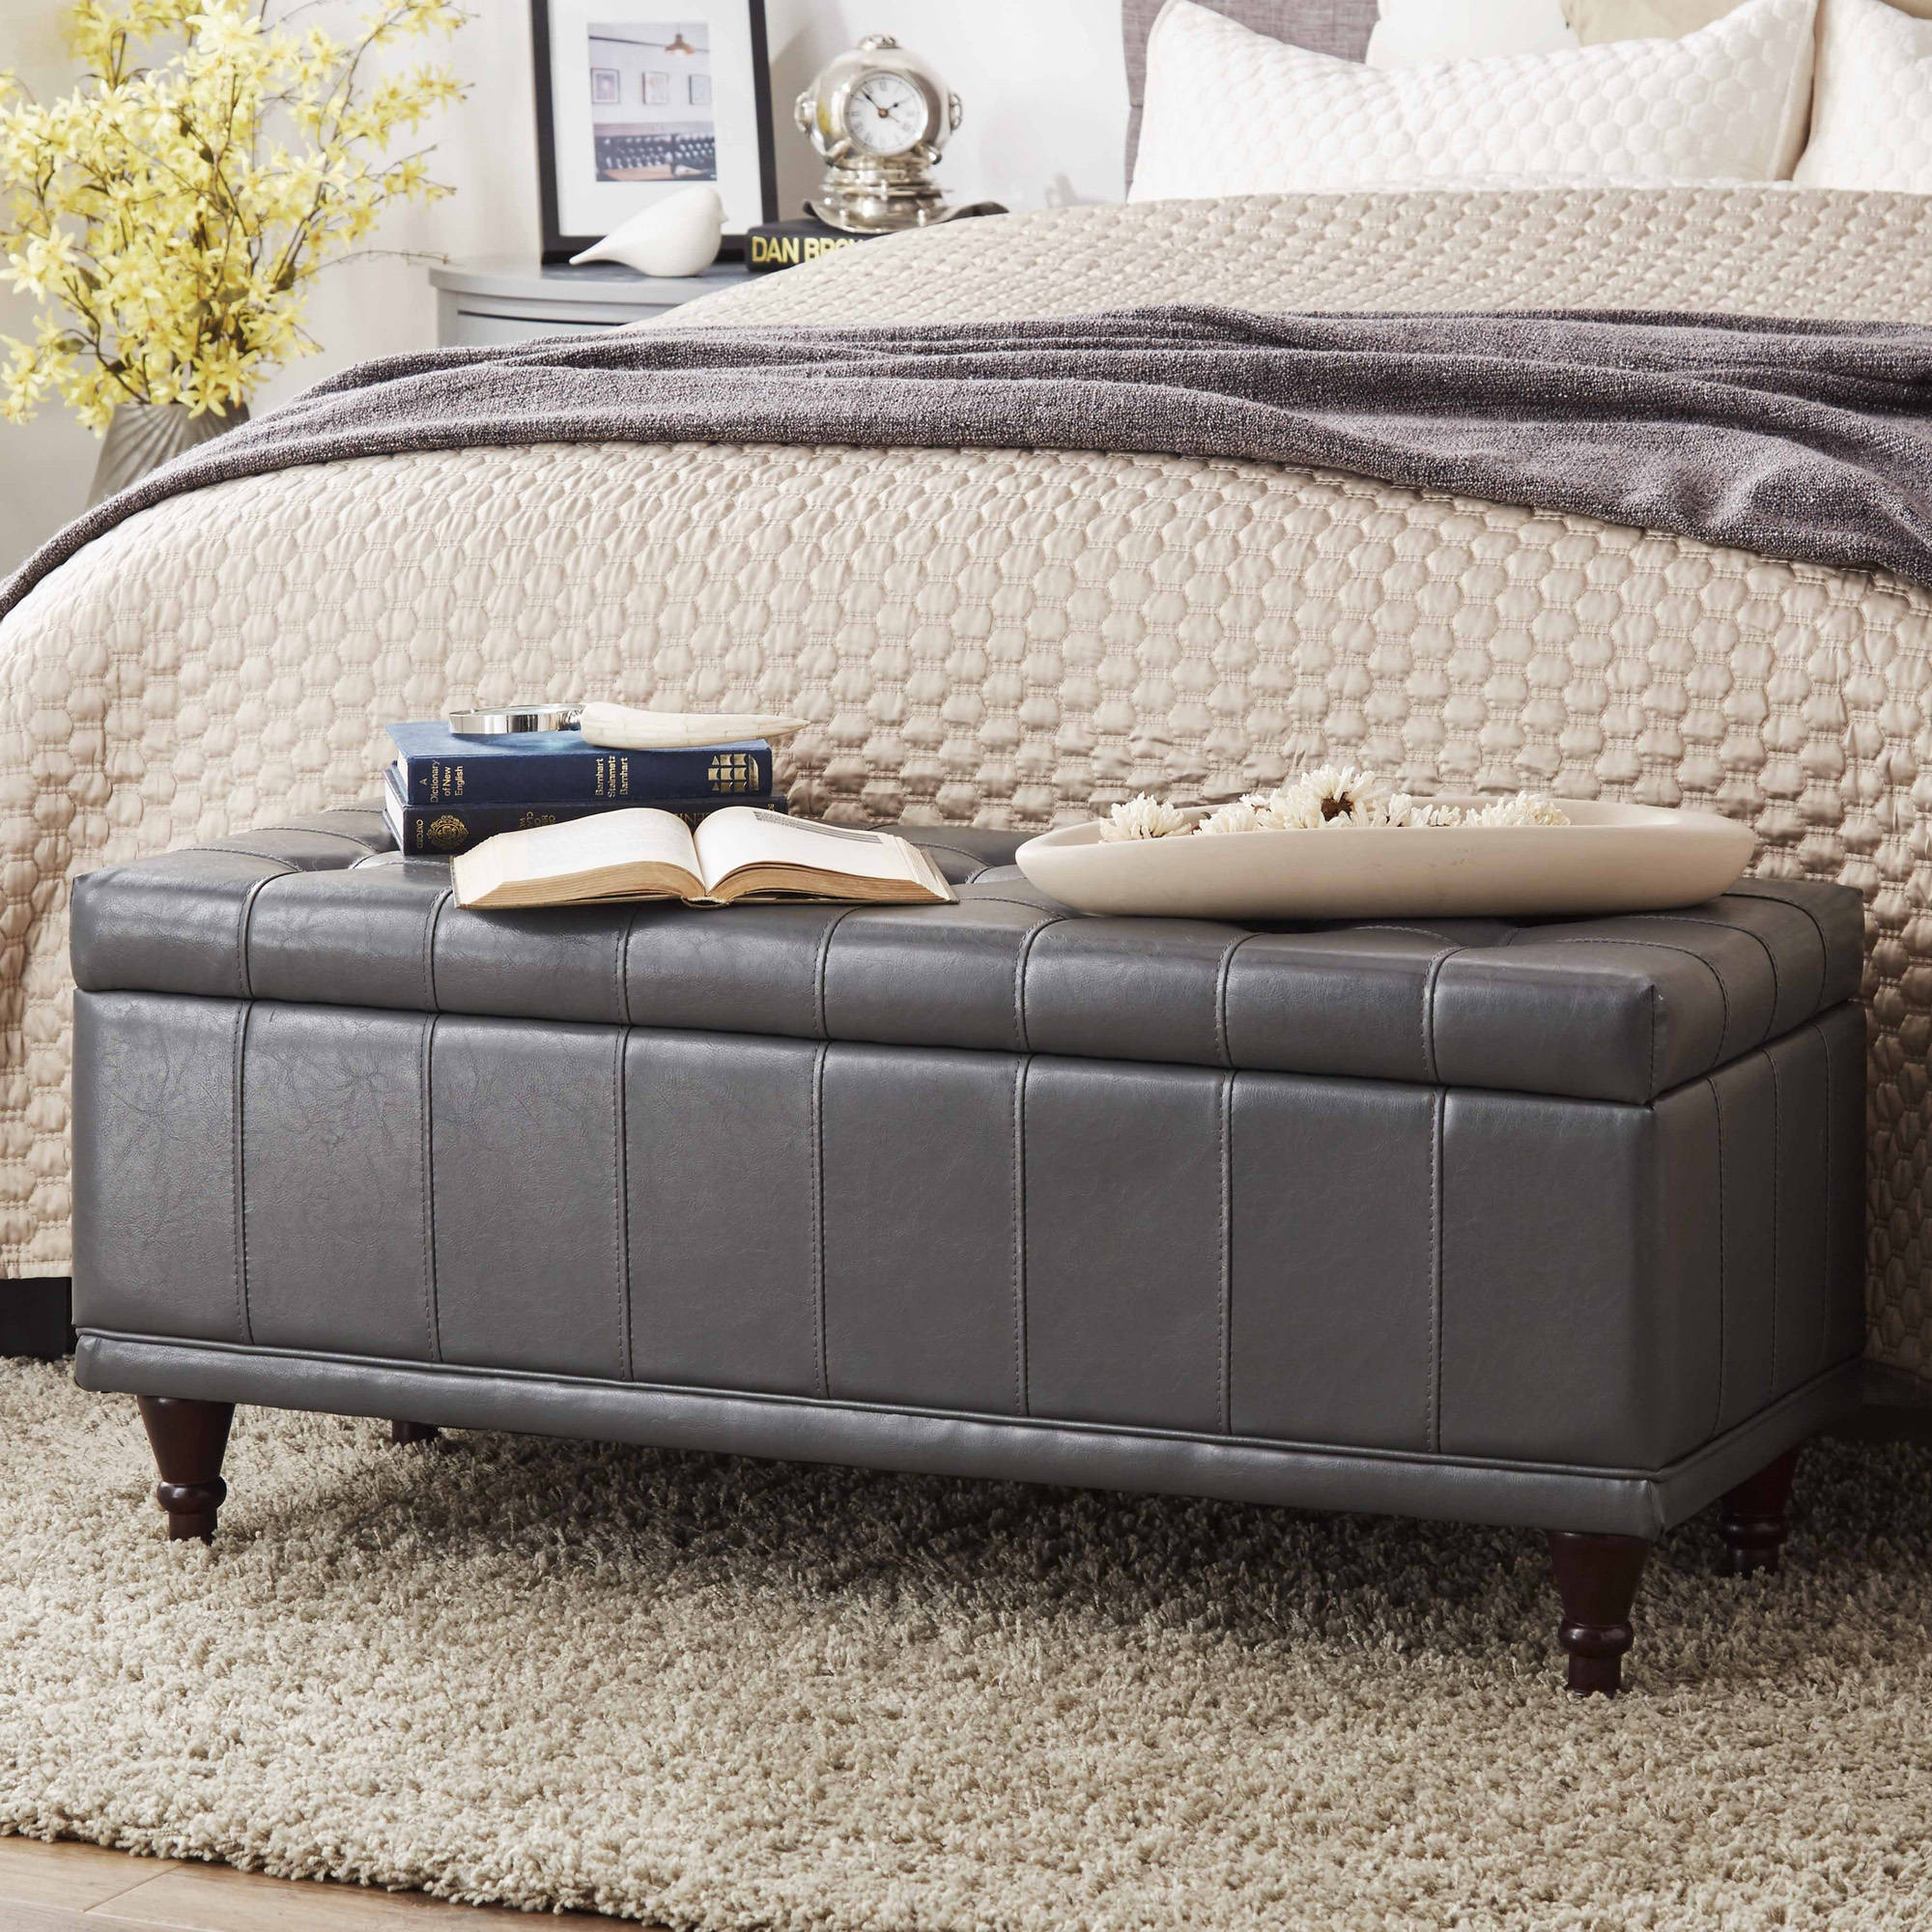 Chelsea Storage Bench
 Chelsea Lane Lift Up Faux Leather Storage Bench Multiple